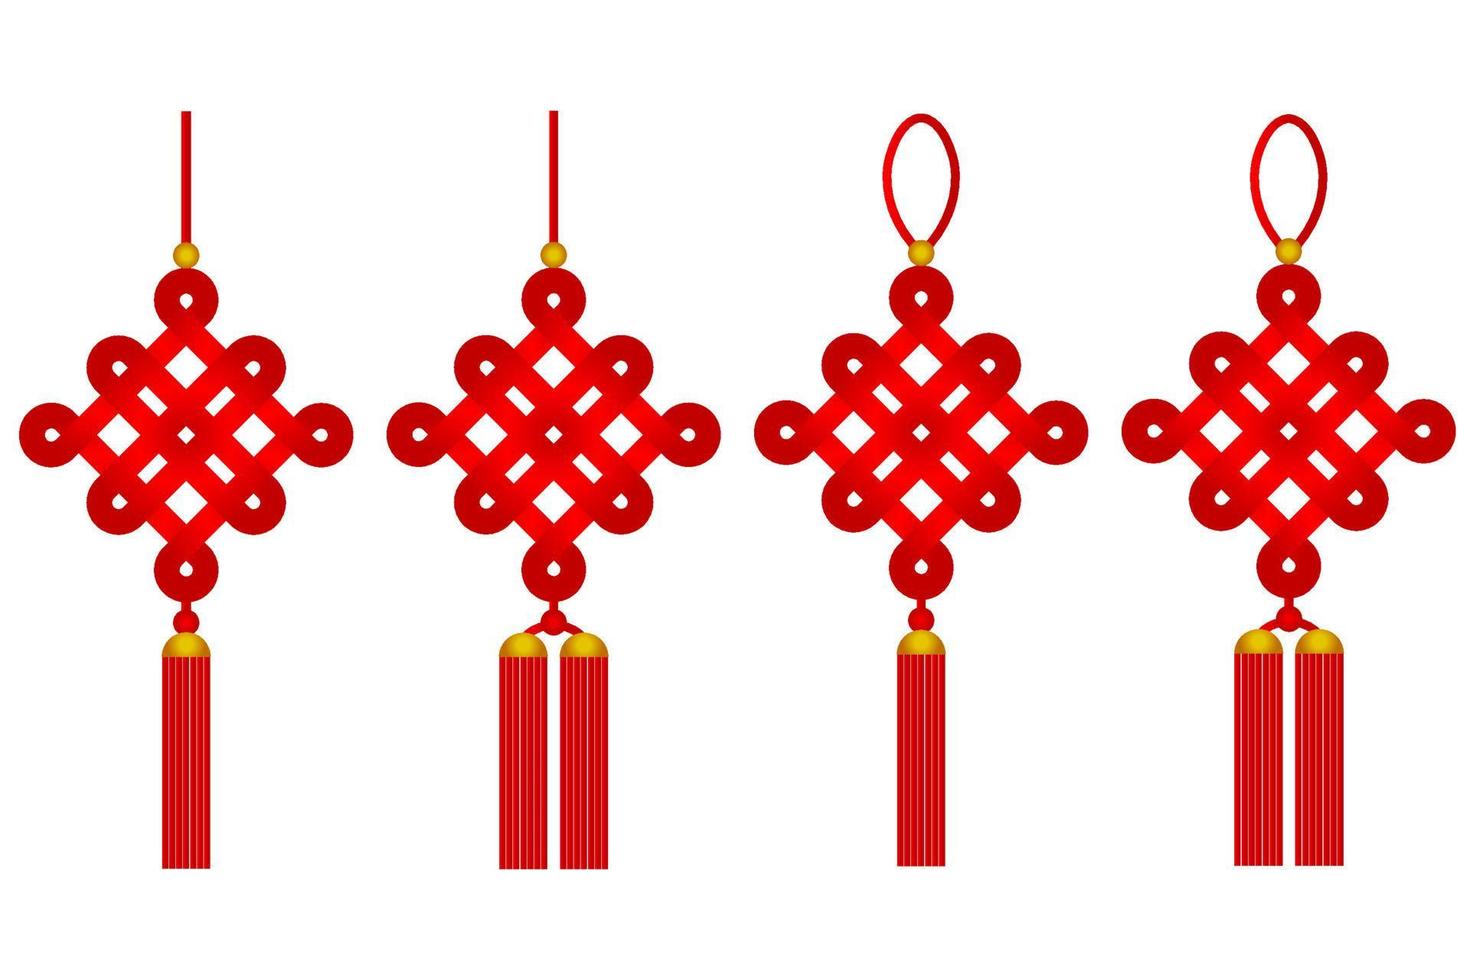 Chinese knot symbol of good luck vector design, The traditional symbol of the lunar Chinese New Year